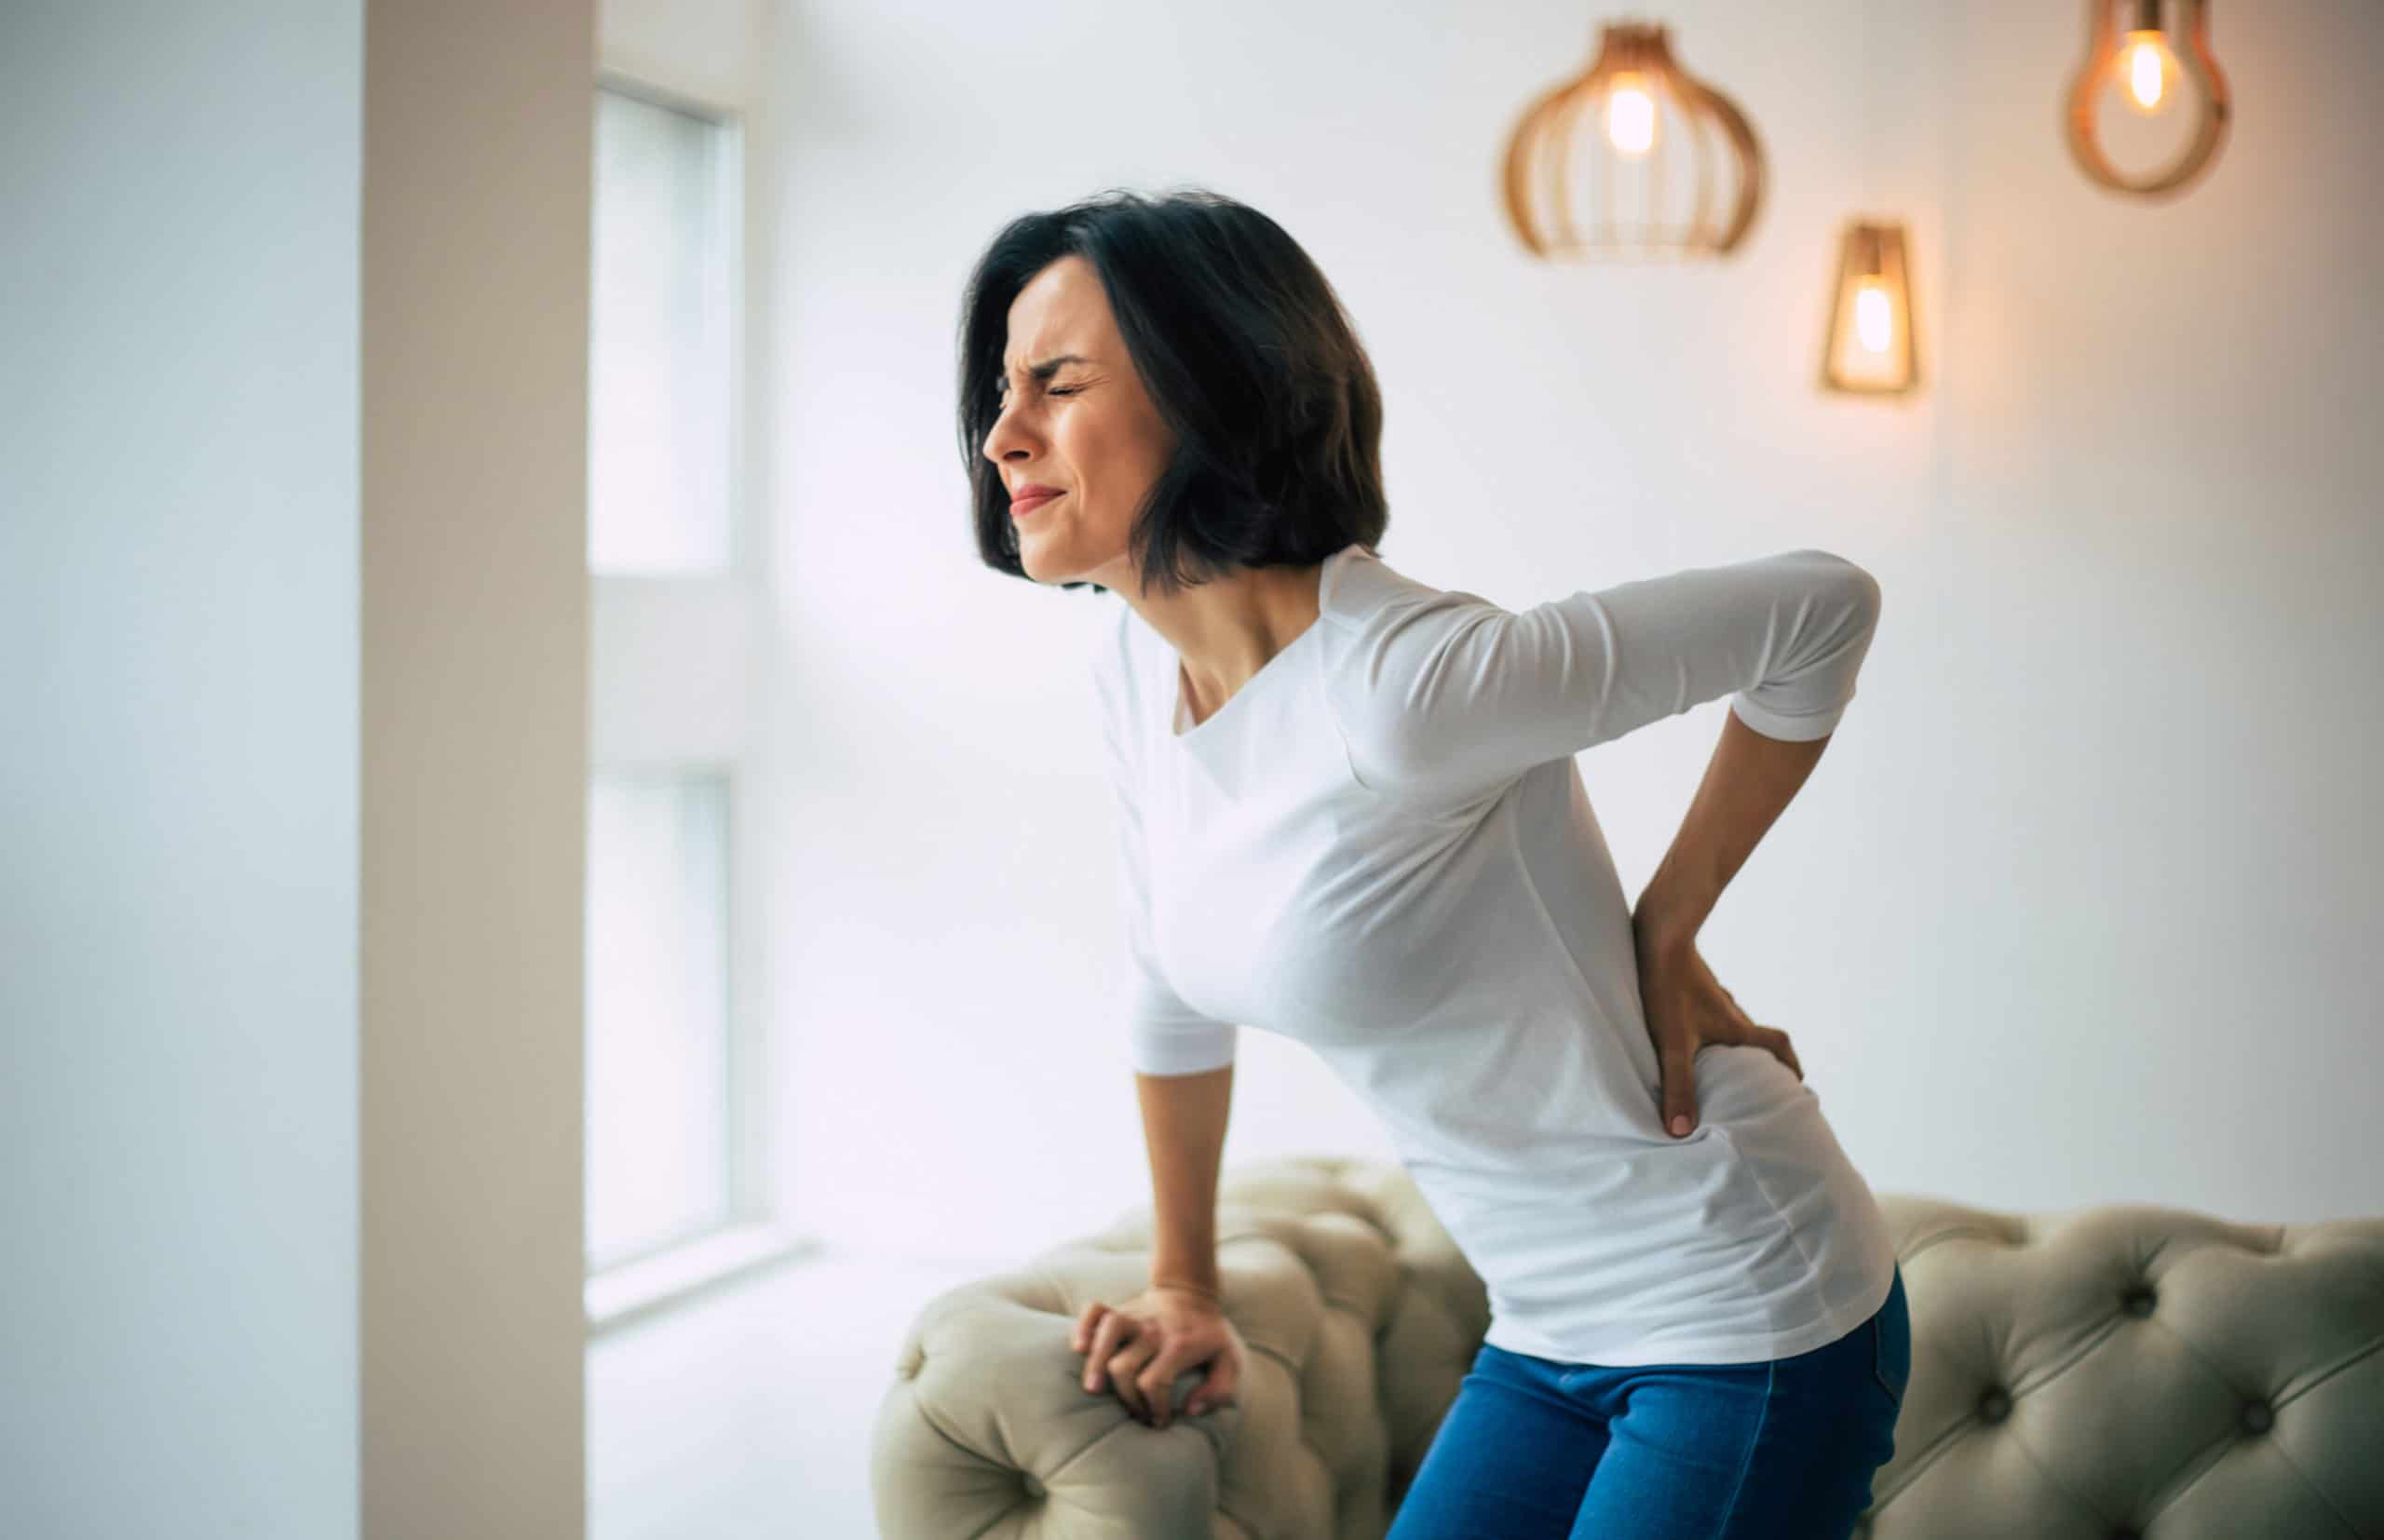 Top 5 Tips for Herniated Disc Pain Relief